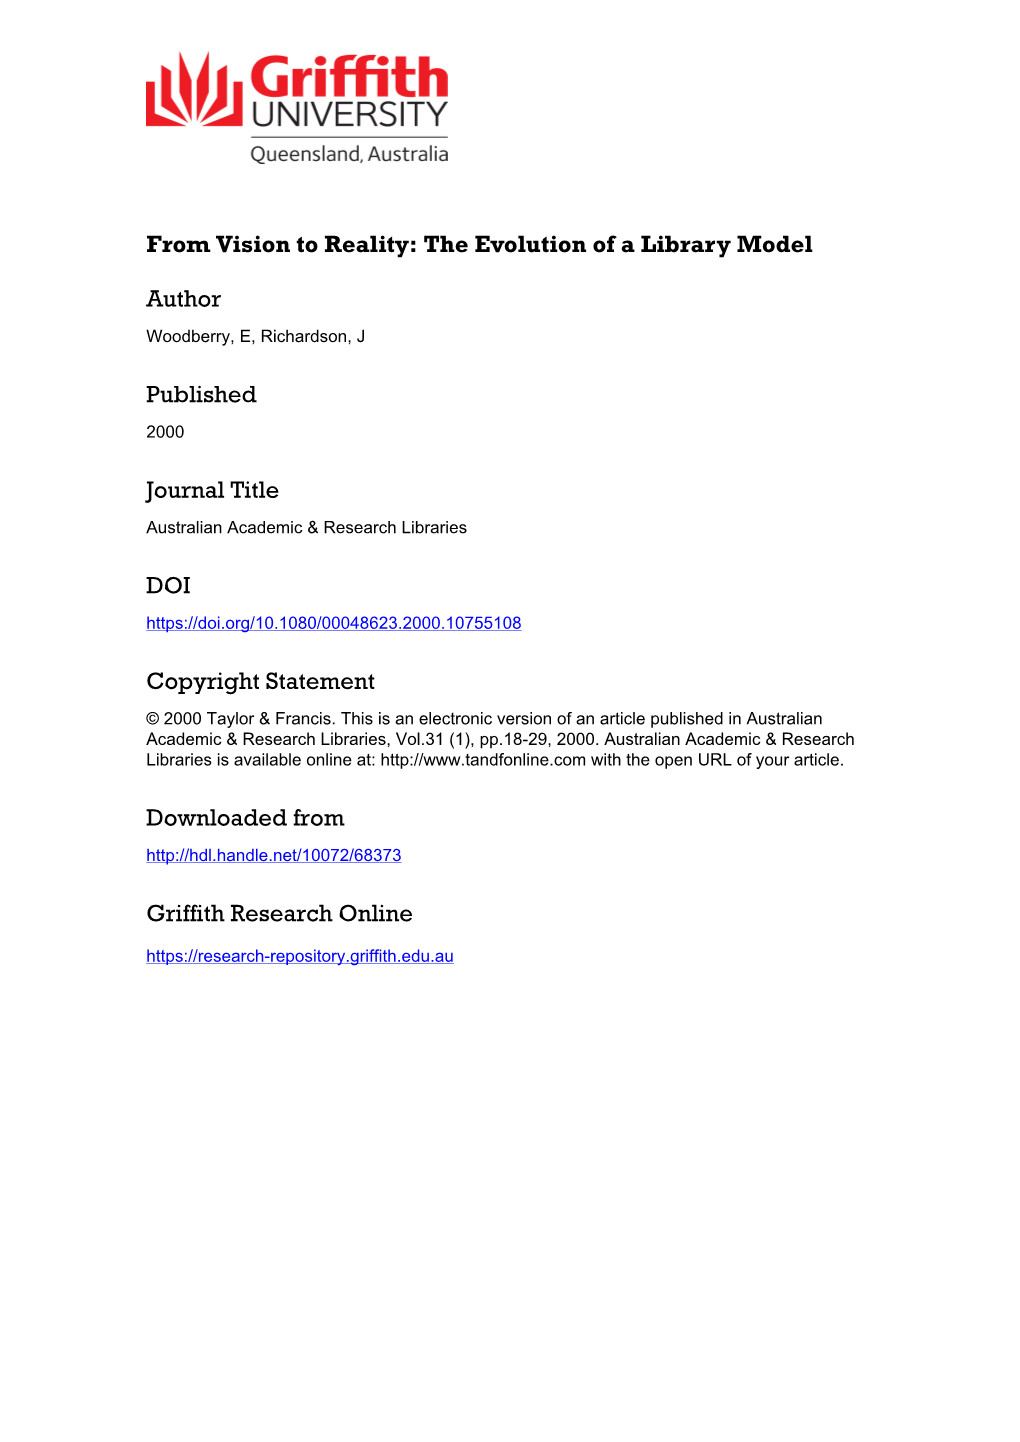 From Vision to Reality: the Evolution of a Library Model